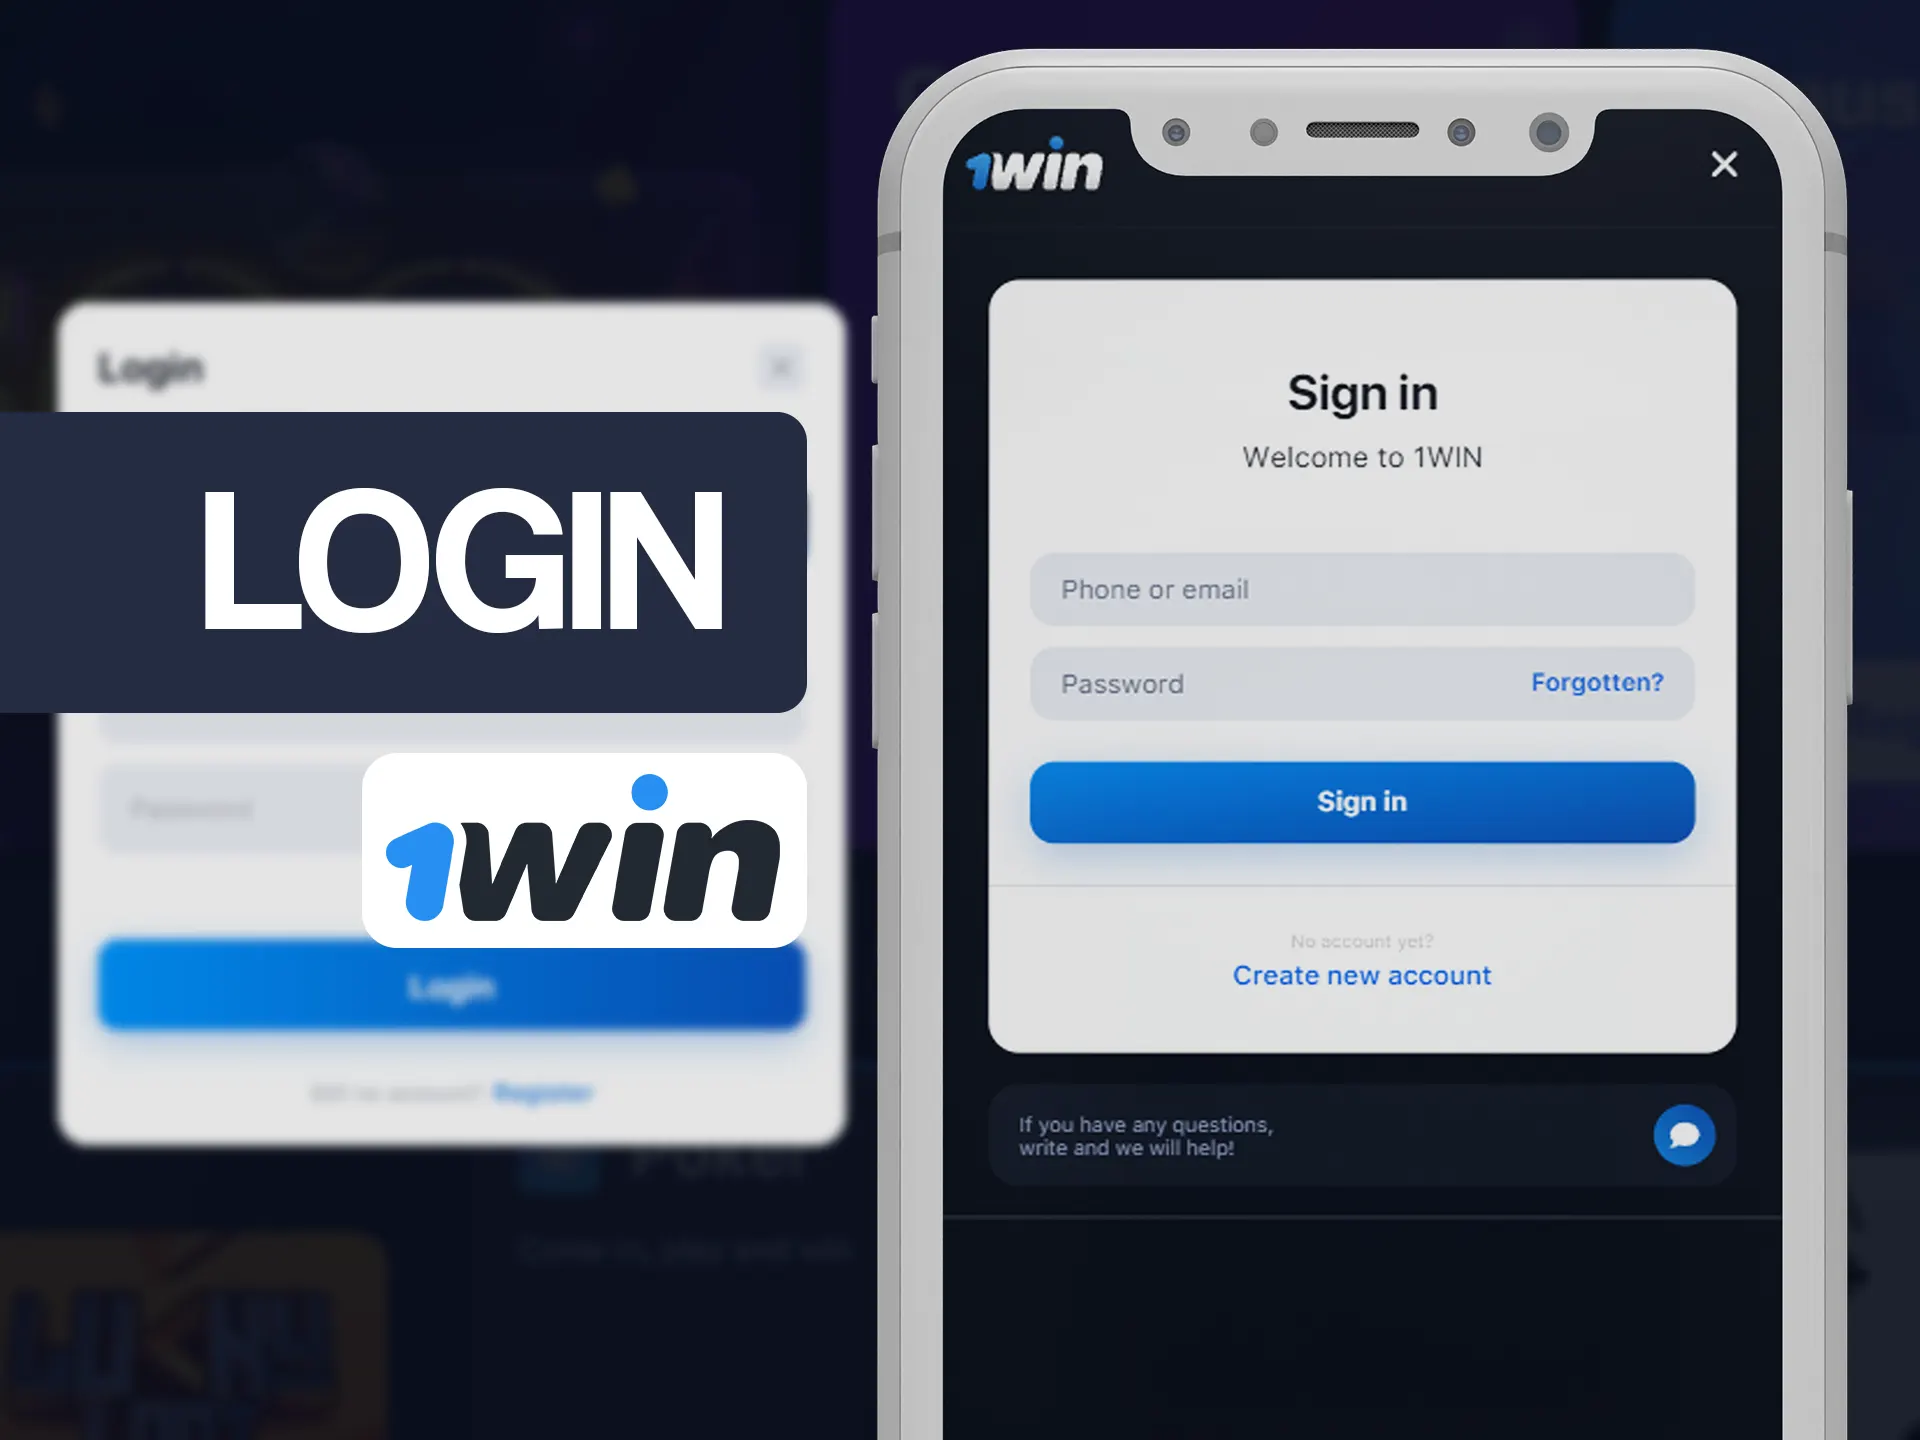 Use your 1win account for logging in.